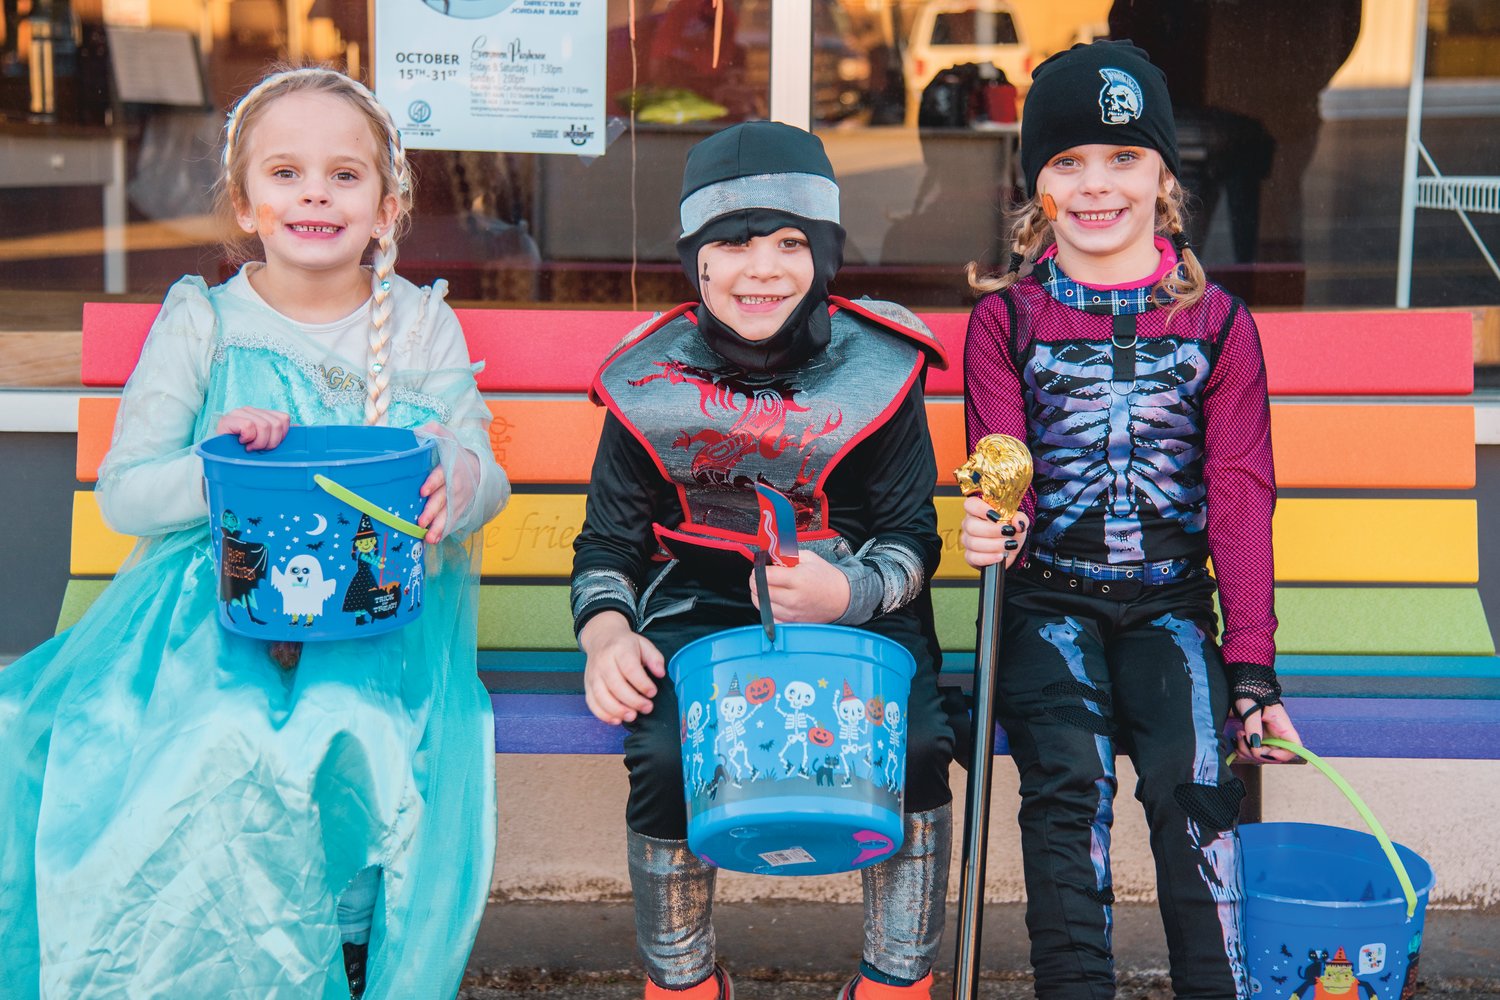 From left, Lillian dressed as Elsa, David dressed as a Dragon Ninja, and Anika dressed as a Dark Rebel smile and pose for a photo while sitting on a Buddy Bench in Morton on Halloween.